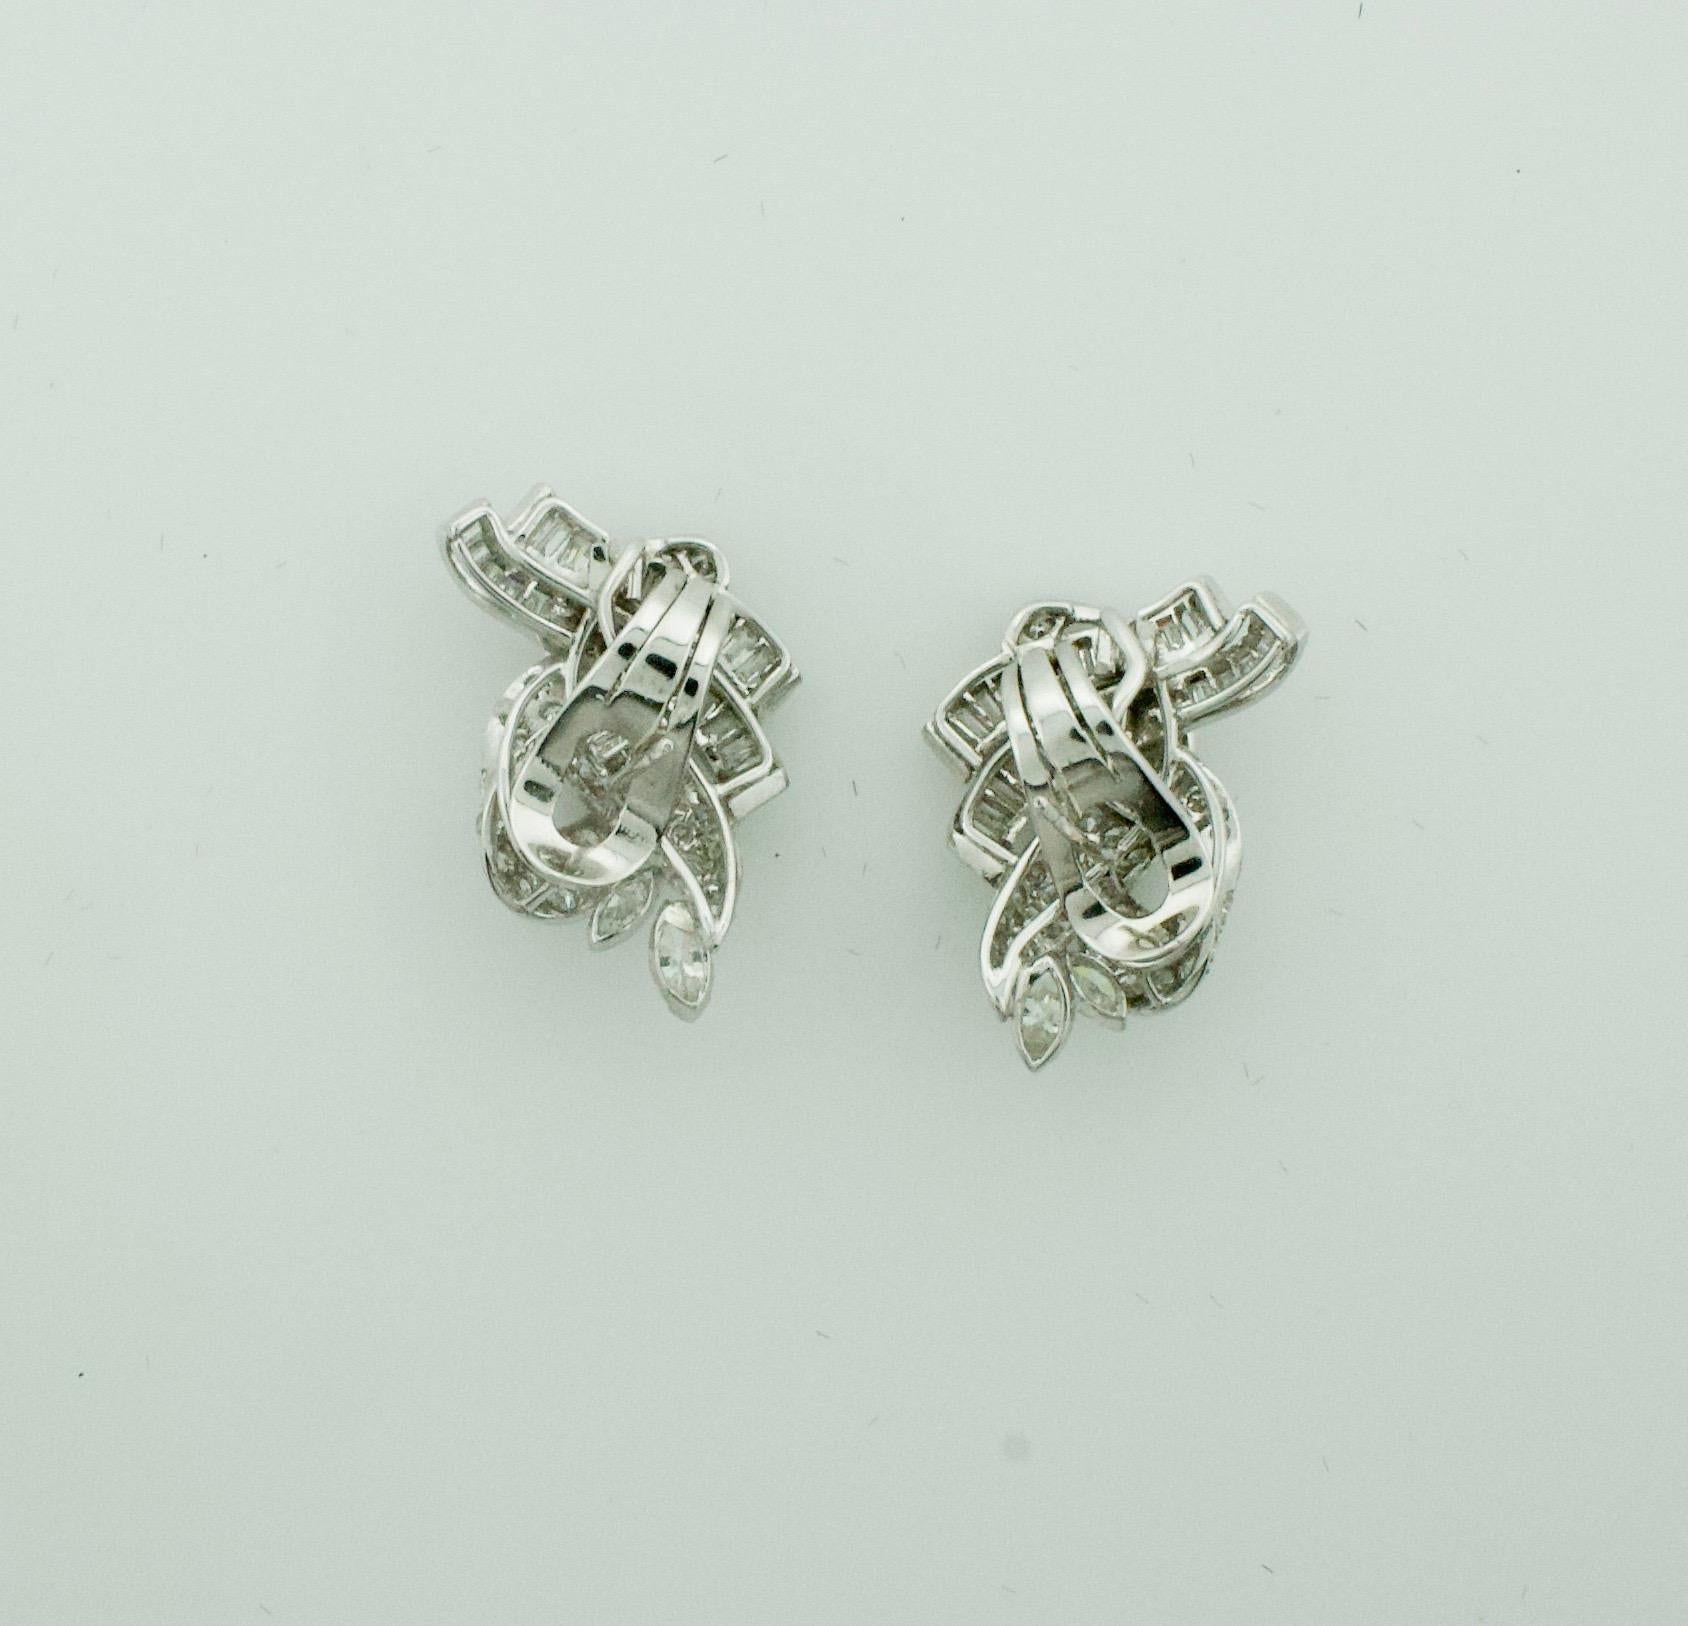 Smart and Sexy Platinum Diamond Earrings Circa 1940's 4.00 Carats Total Weight
Four Marquise Cut Diamonds Weighing .60 Carats Approximately 
48 Baguette Cut Diamonds Weighing 1.75 Carats Approximately 
72 Round Cut Diamonds Weighing 1.65 Carats